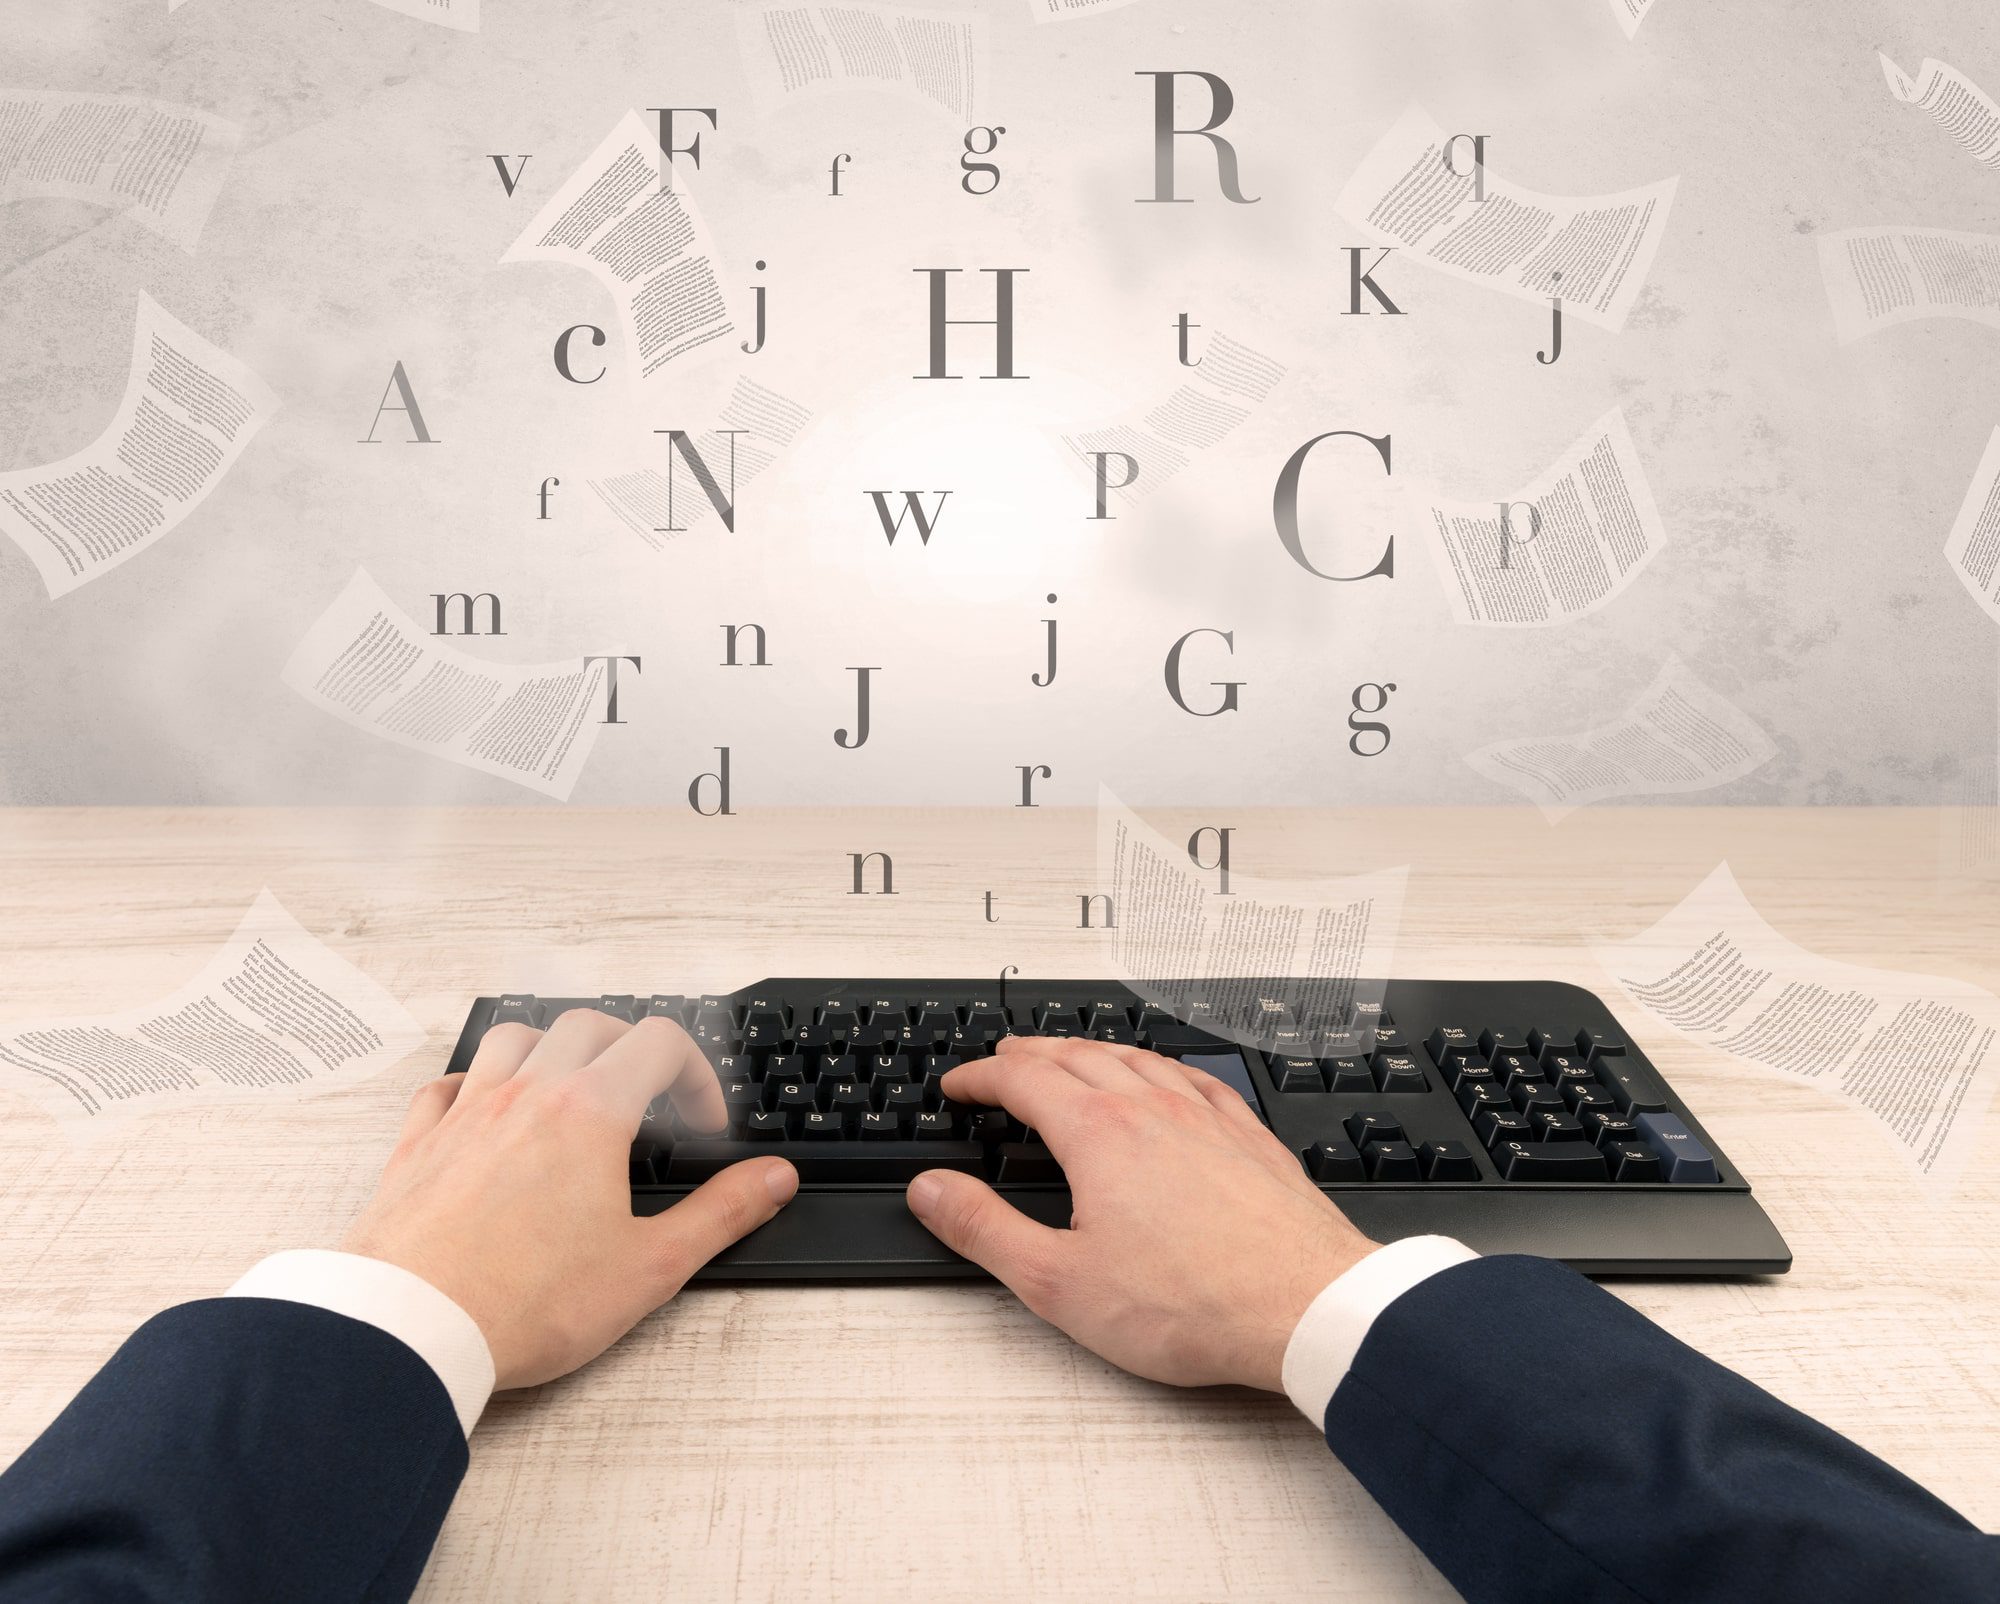 business person's hands on a keyboard while documents and letters fly around, illustrating content scaling and how to scale content creation